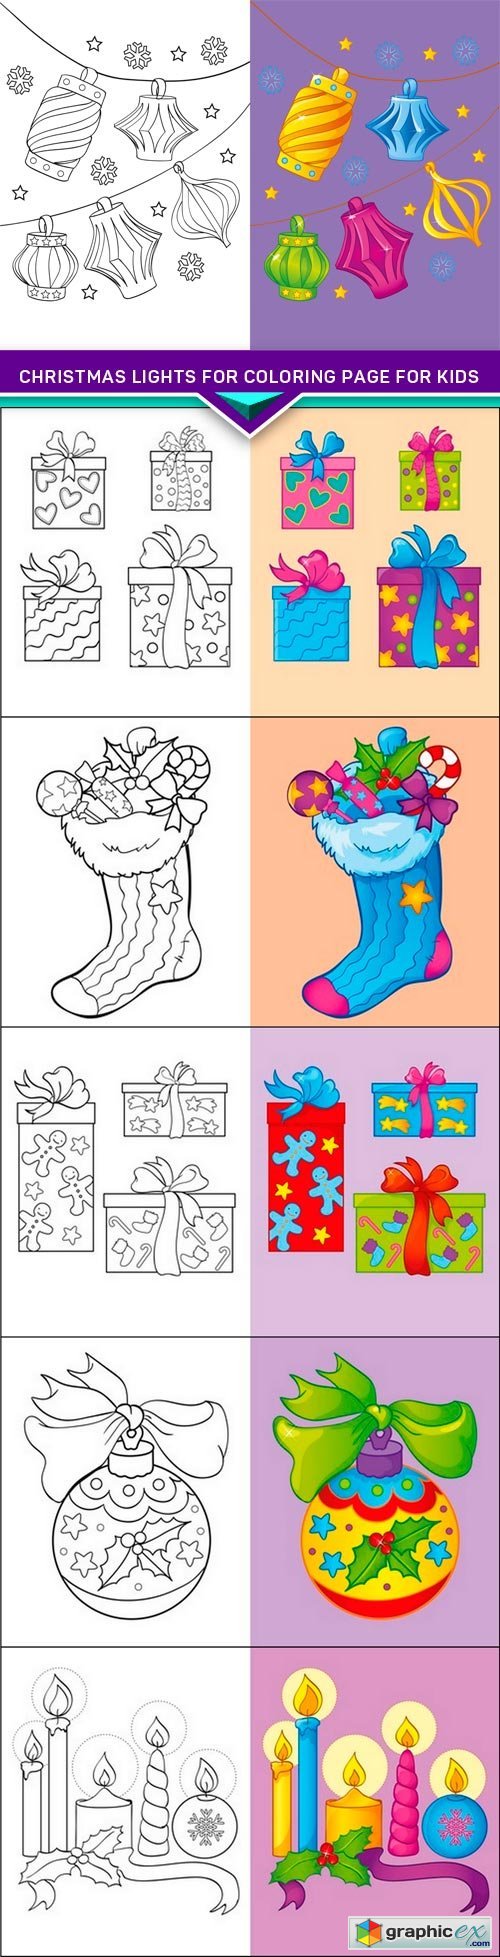 Christmas lights for coloring page for kids 6X EPS